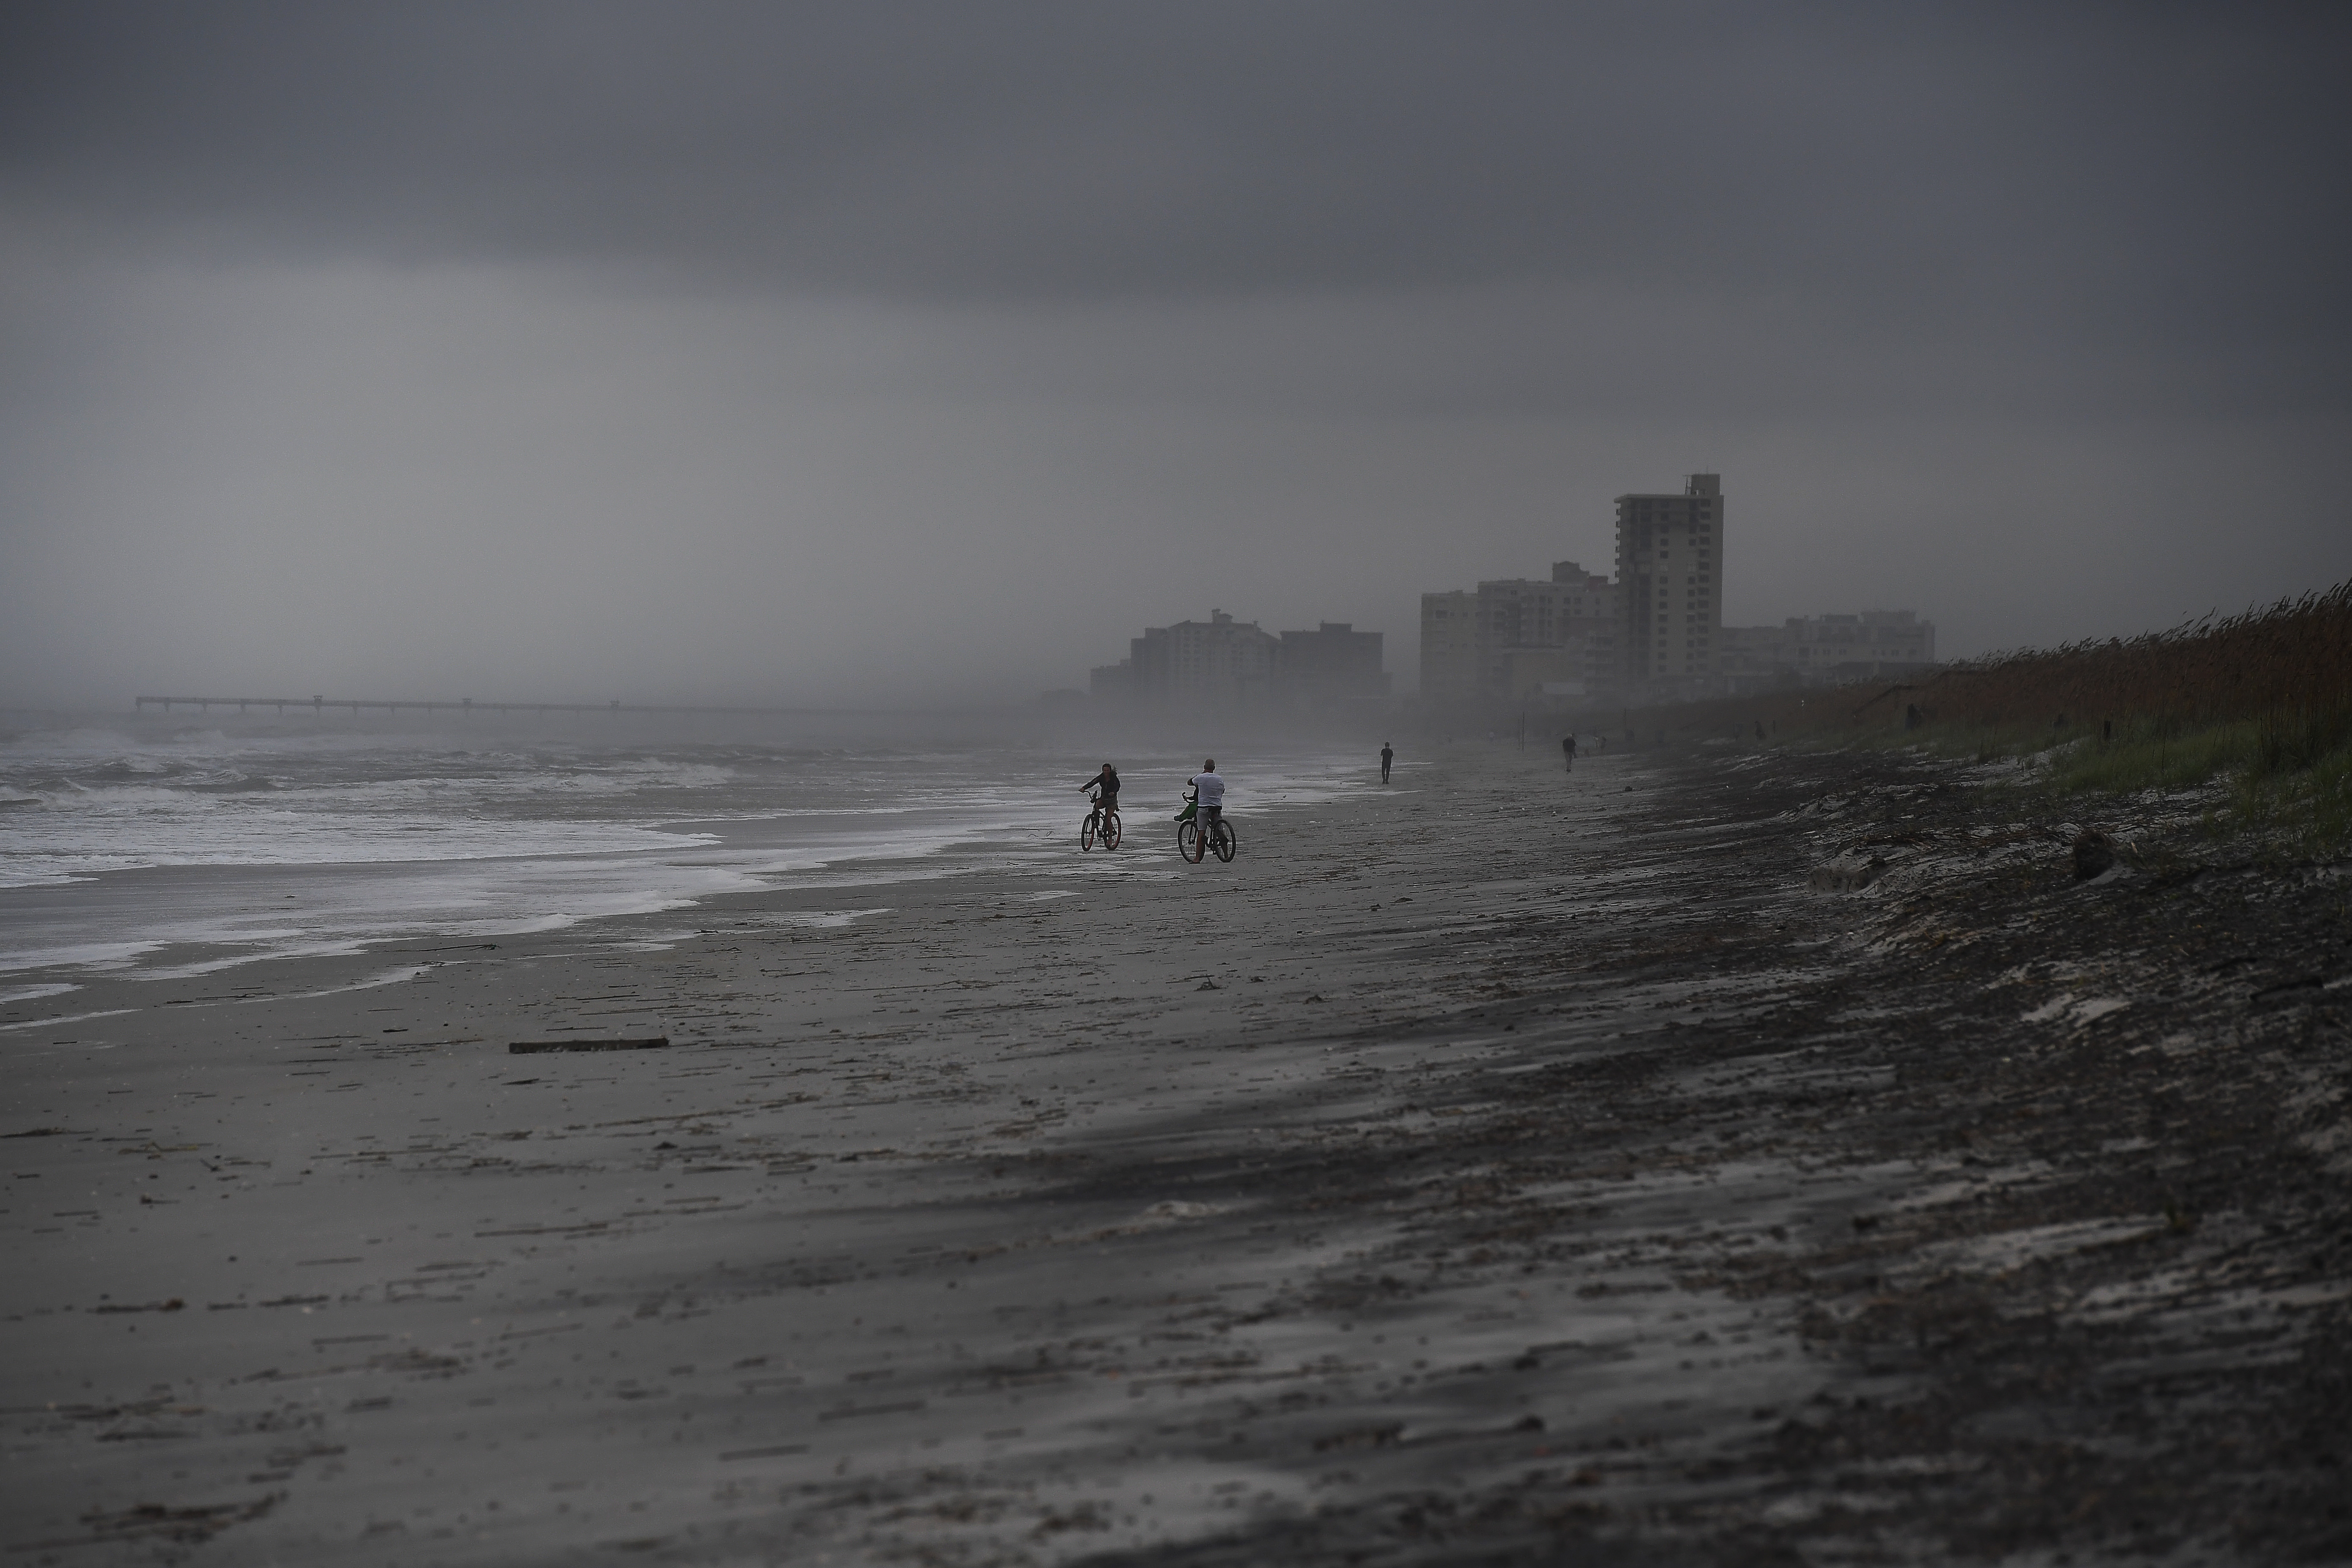 People bike on the beach ahead of hurricane Matthew in Atlantic Beach, Florida, on October 5, 2016. The United States began evacuating coastal areas  as Hurricane Matthew churned toward the Bahamas, after killing at least nine people in the Caribbean in a maelstrom of wind, mud and water. / AFP PHOTO / Jewel SAMAD